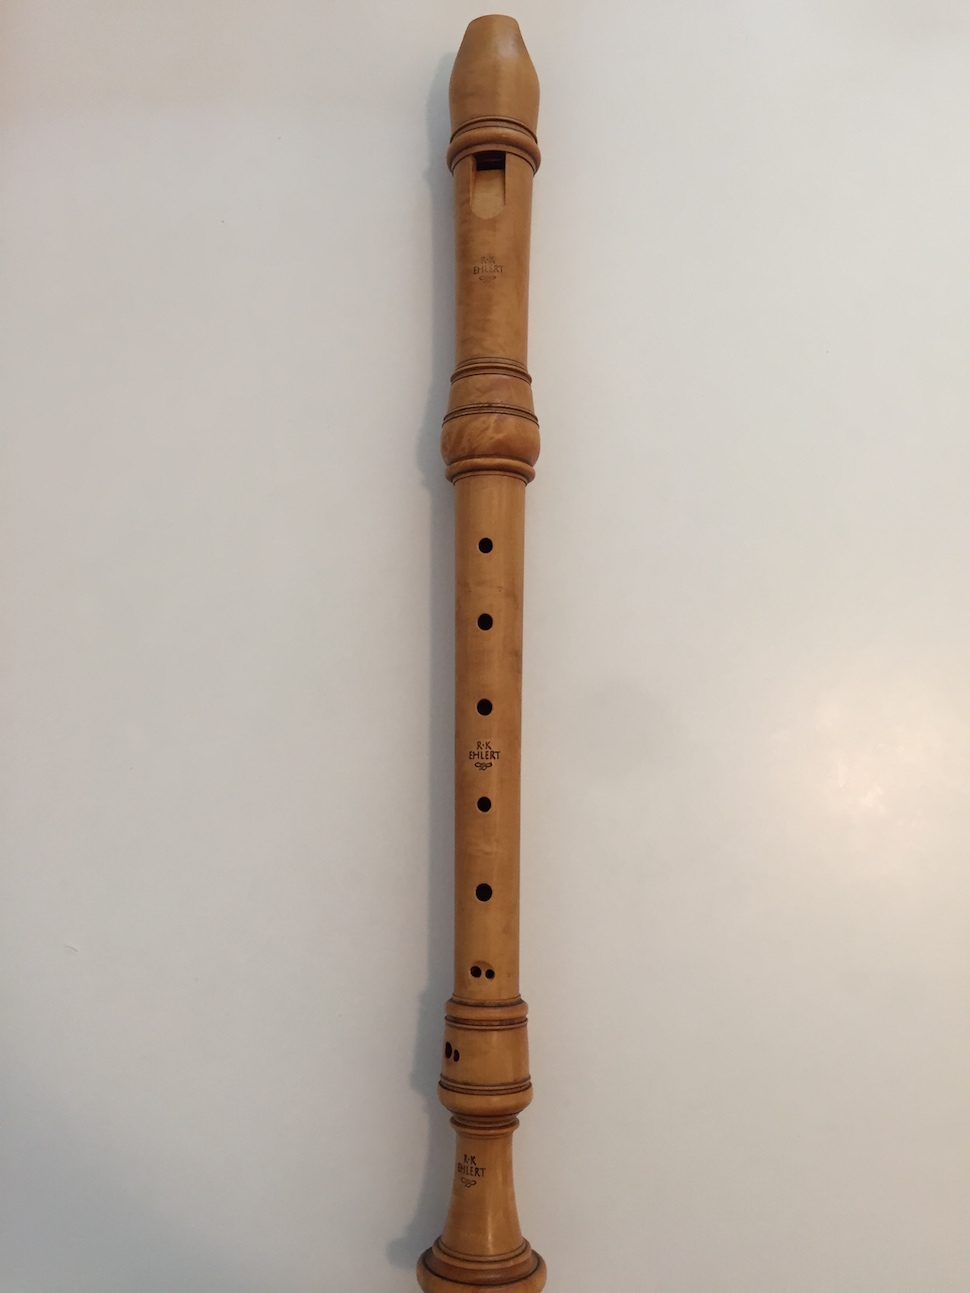 bressan-alto-recorder-by-ehlert-recorders-for-sale-com-01 \u2014 Recorders for sale